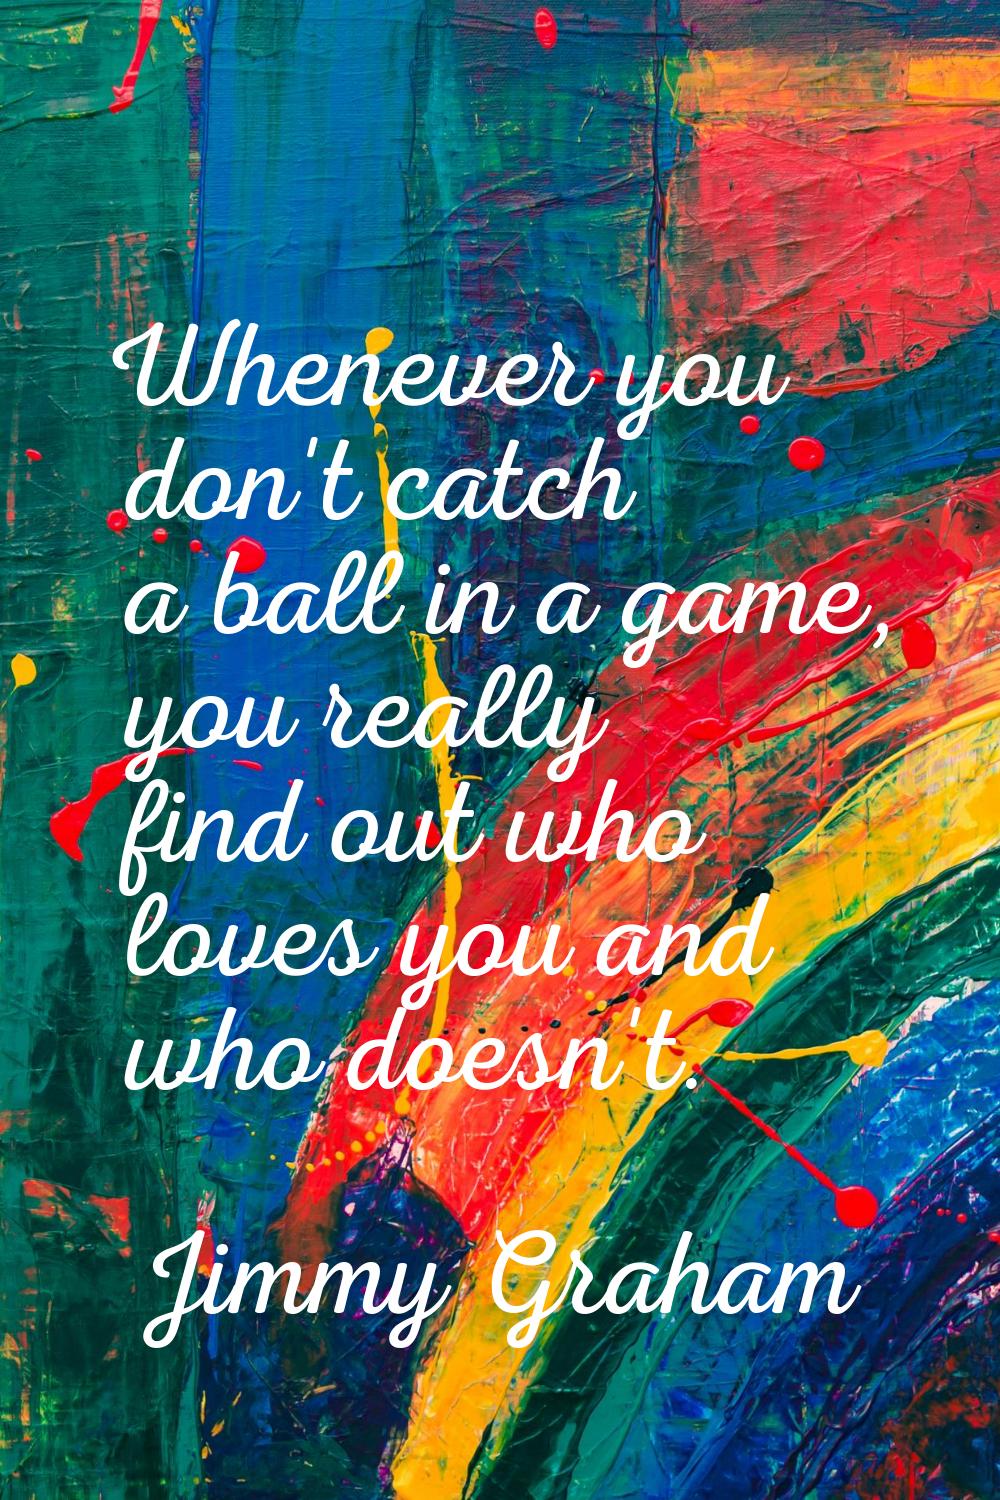 Whenever you don't catch a ball in a game, you really find out who loves you and who doesn't.